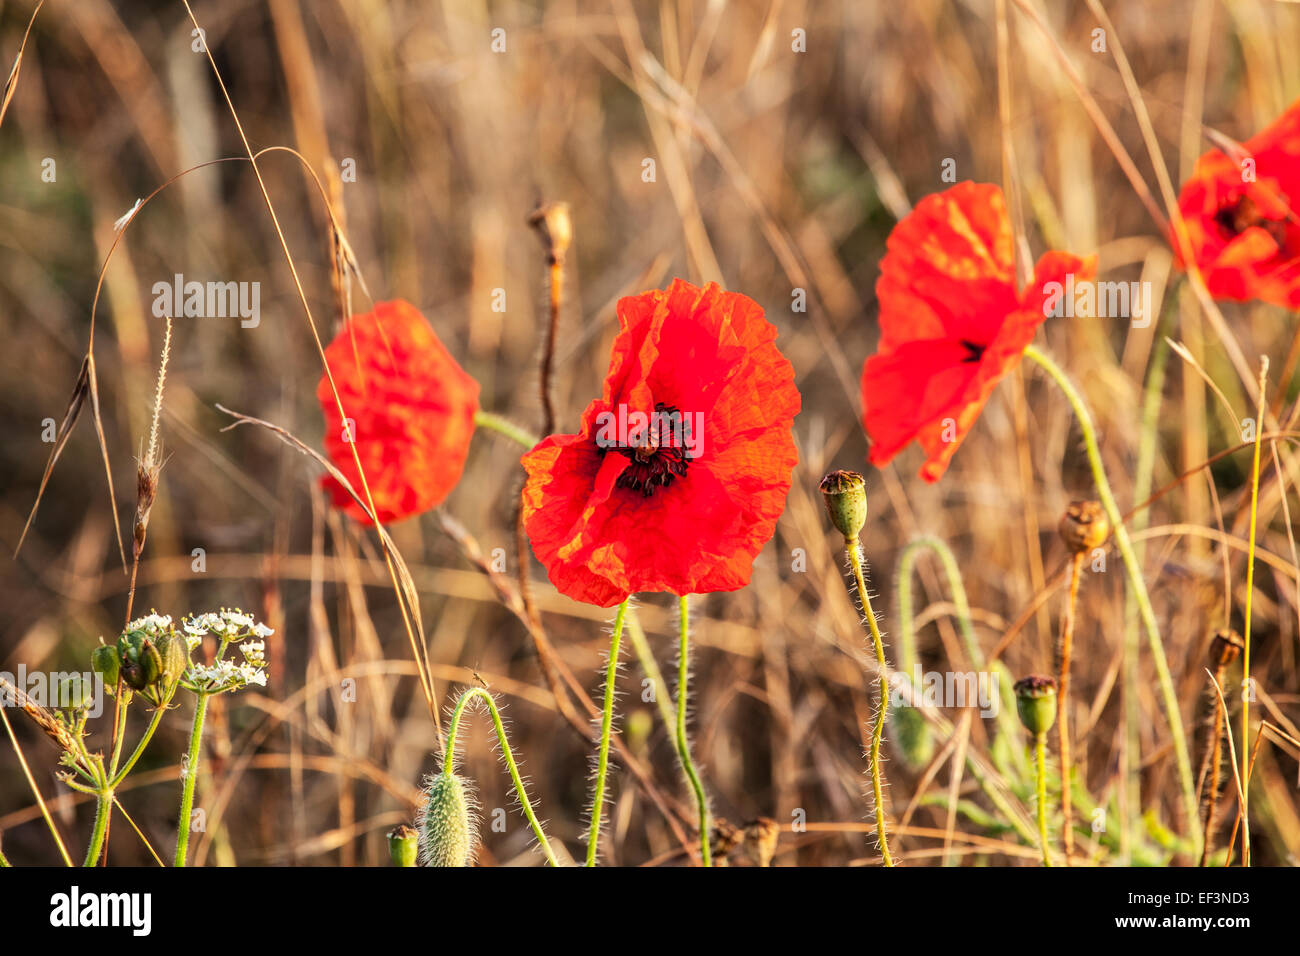 Red poppies Papaver rhoeas in a field. Stock Photo